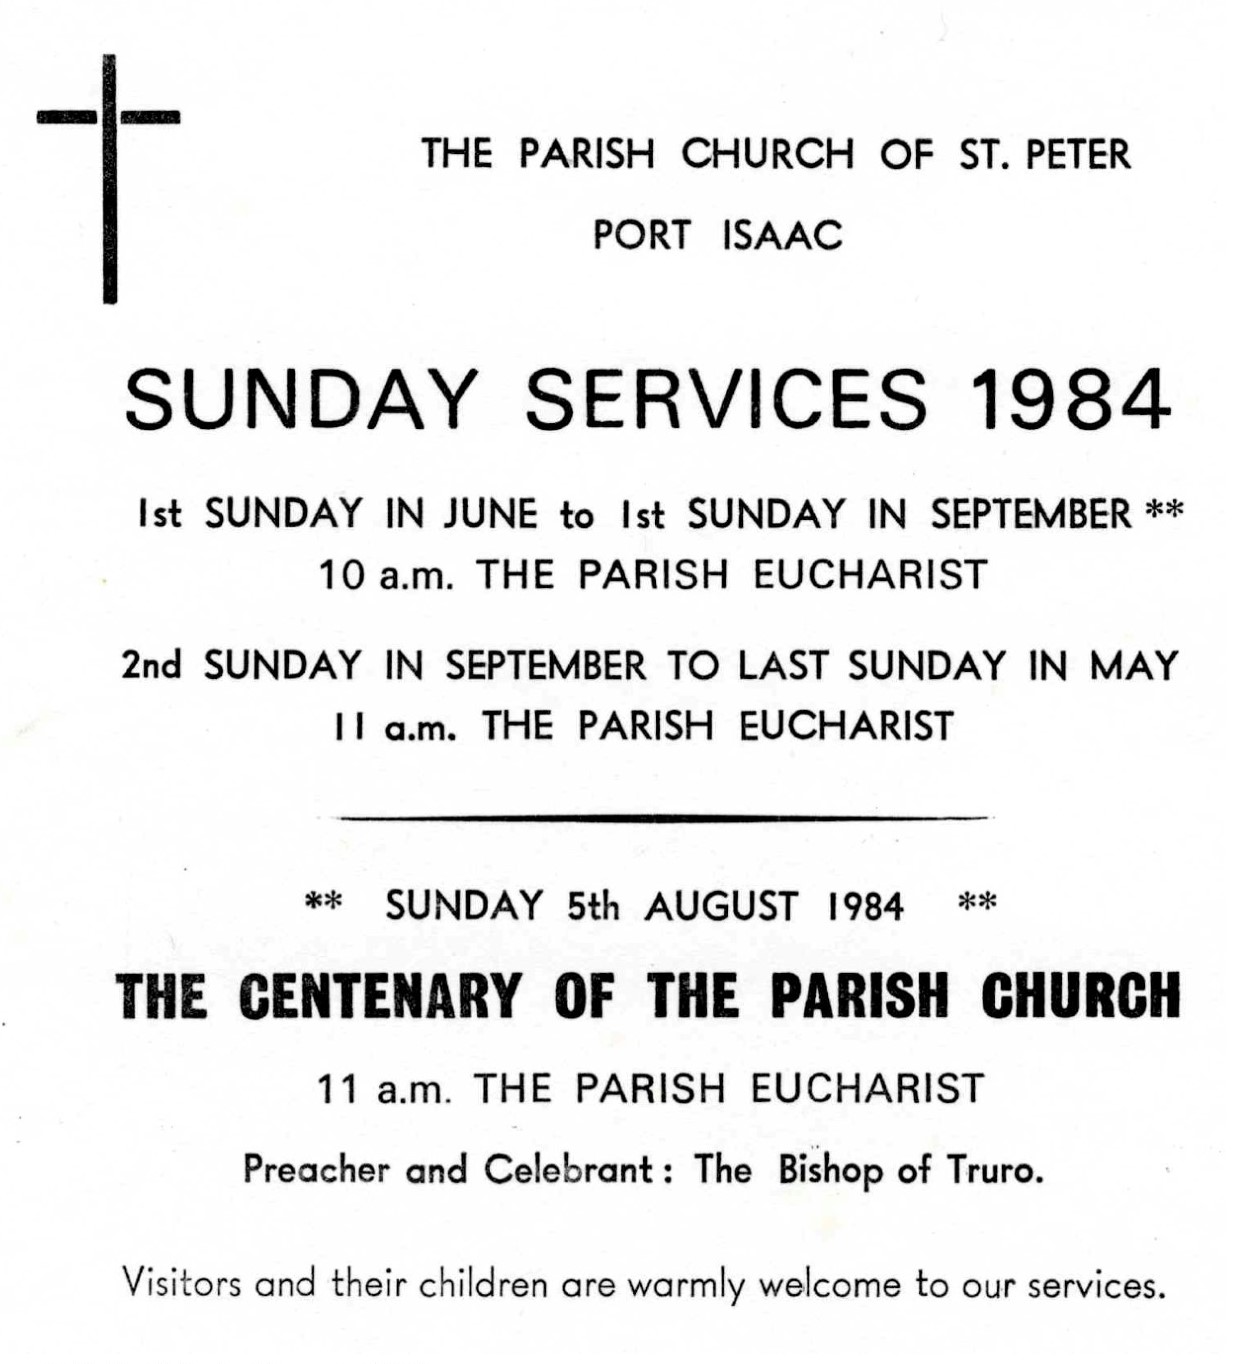 St Peter's Church Sunday Services, 1984